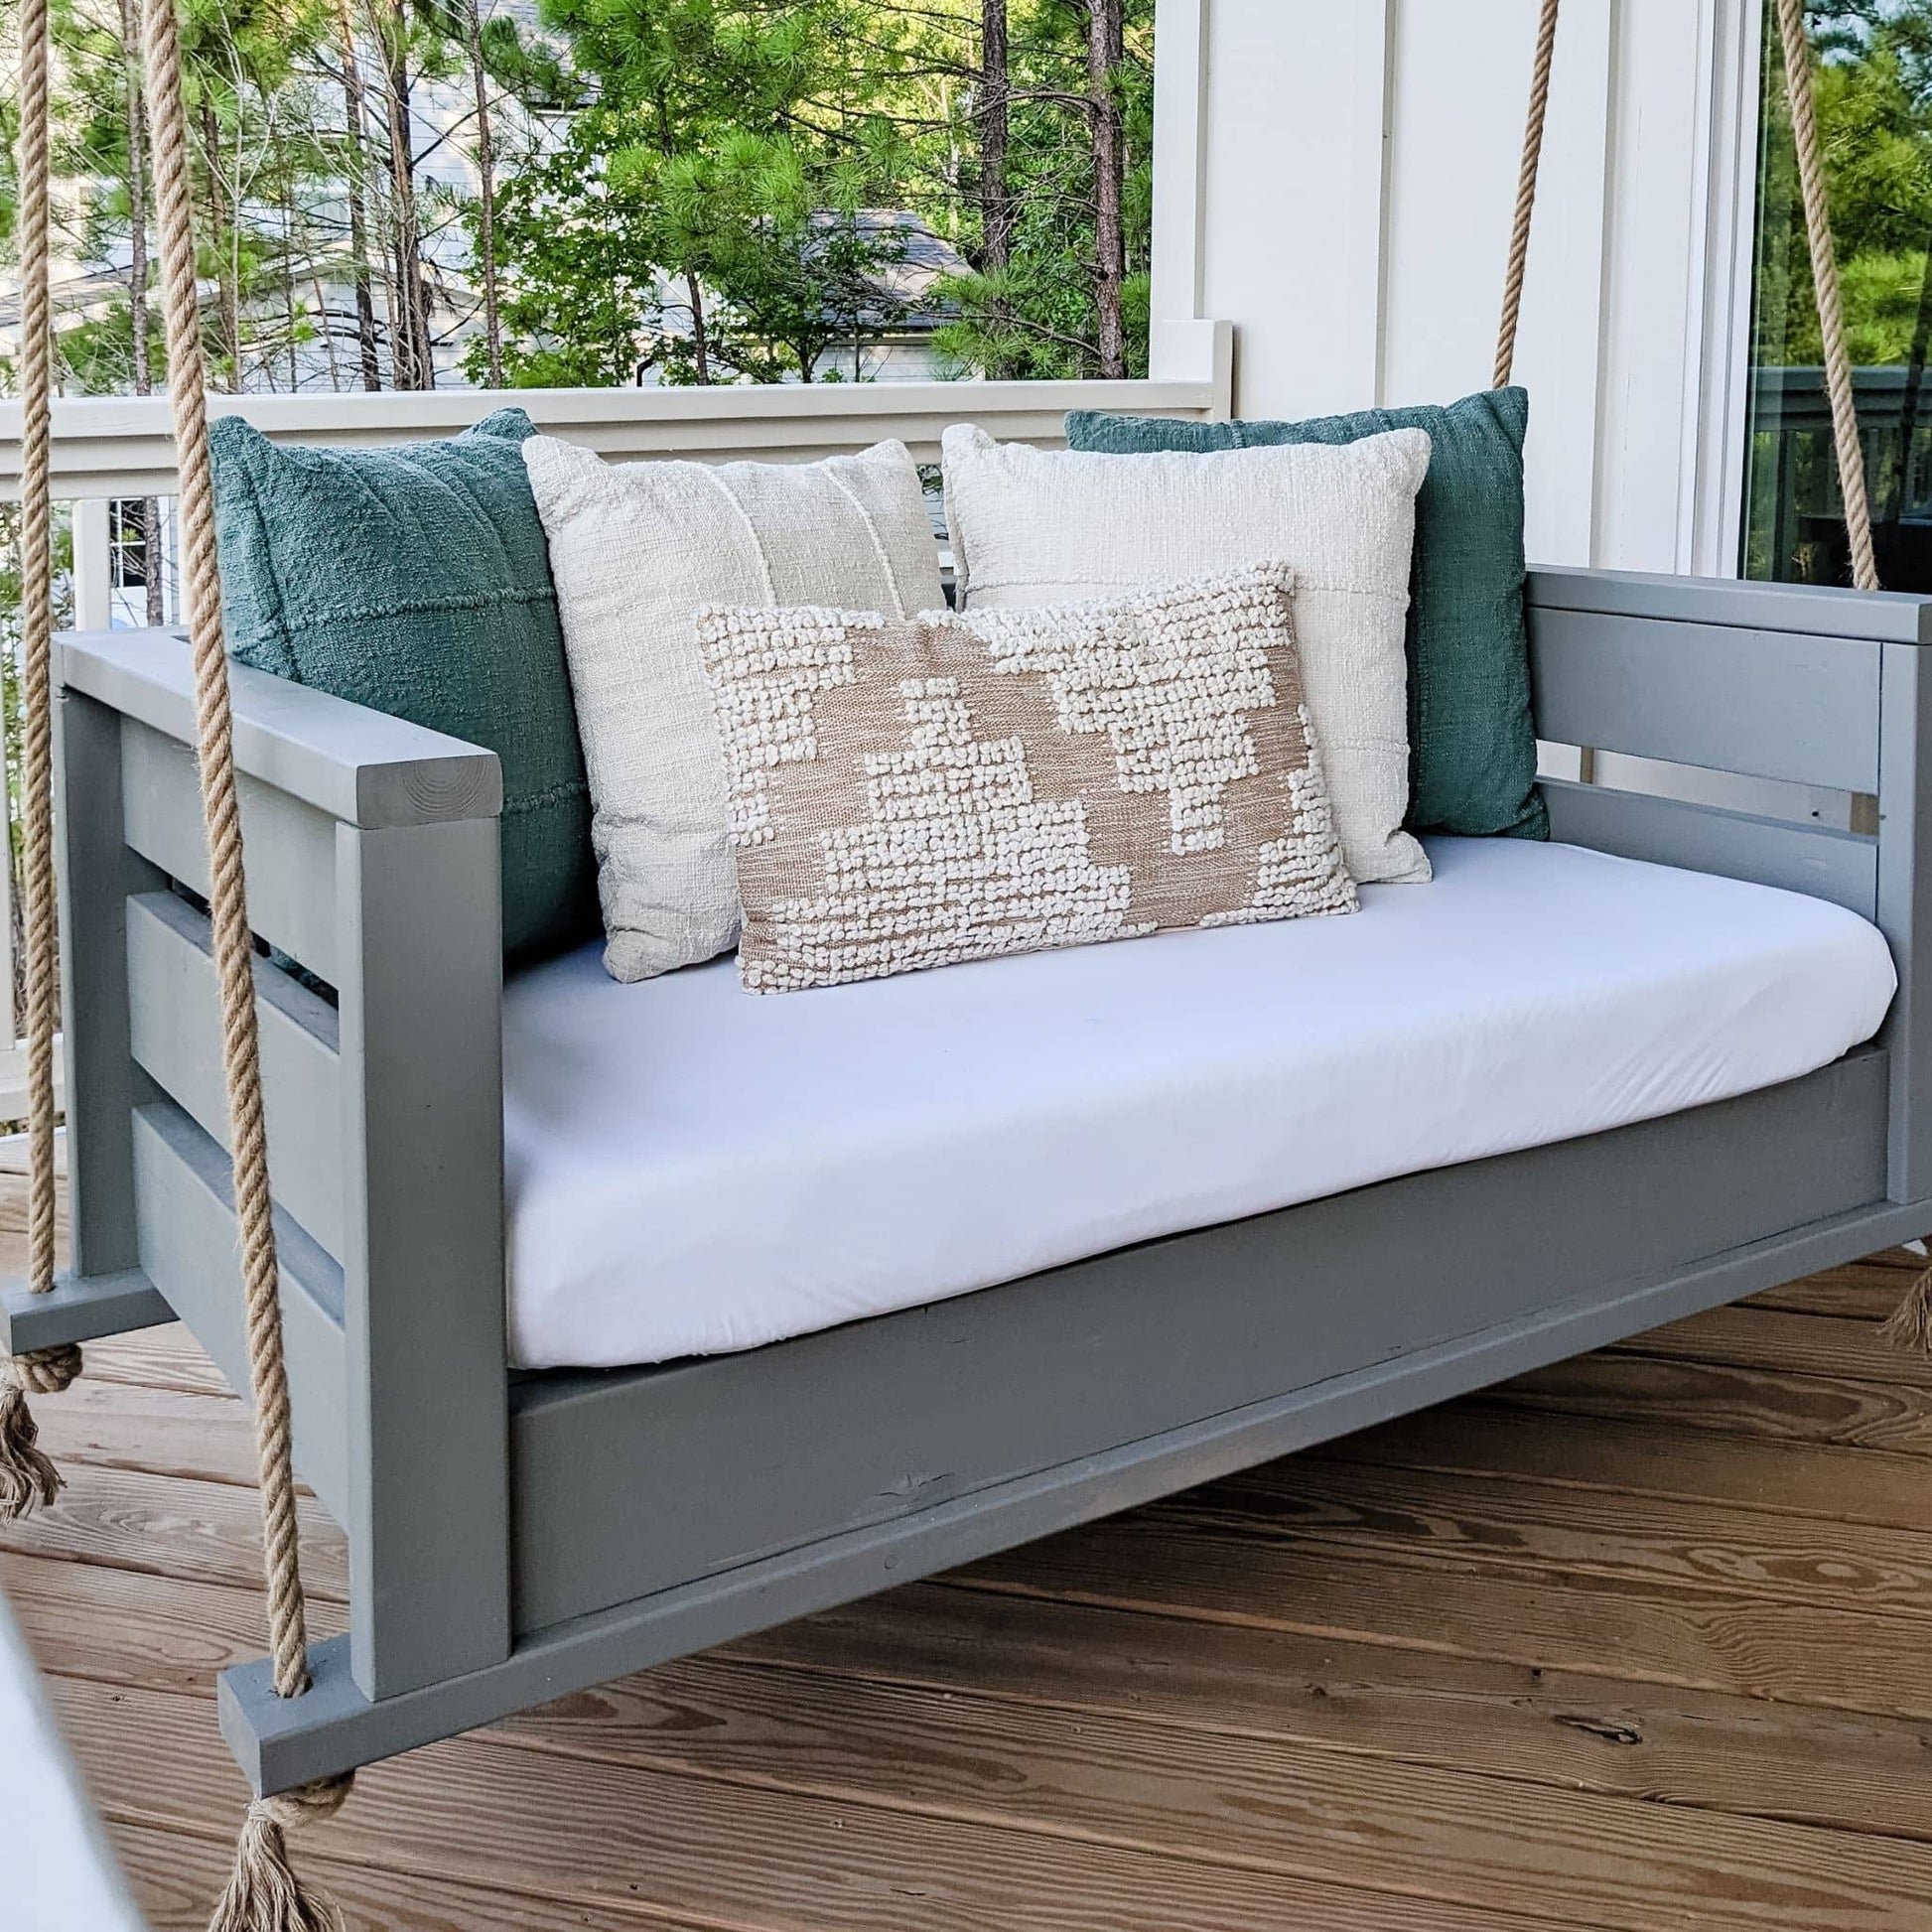 How to Build a Crib Mattress Porch Swing - Plank and Pillow